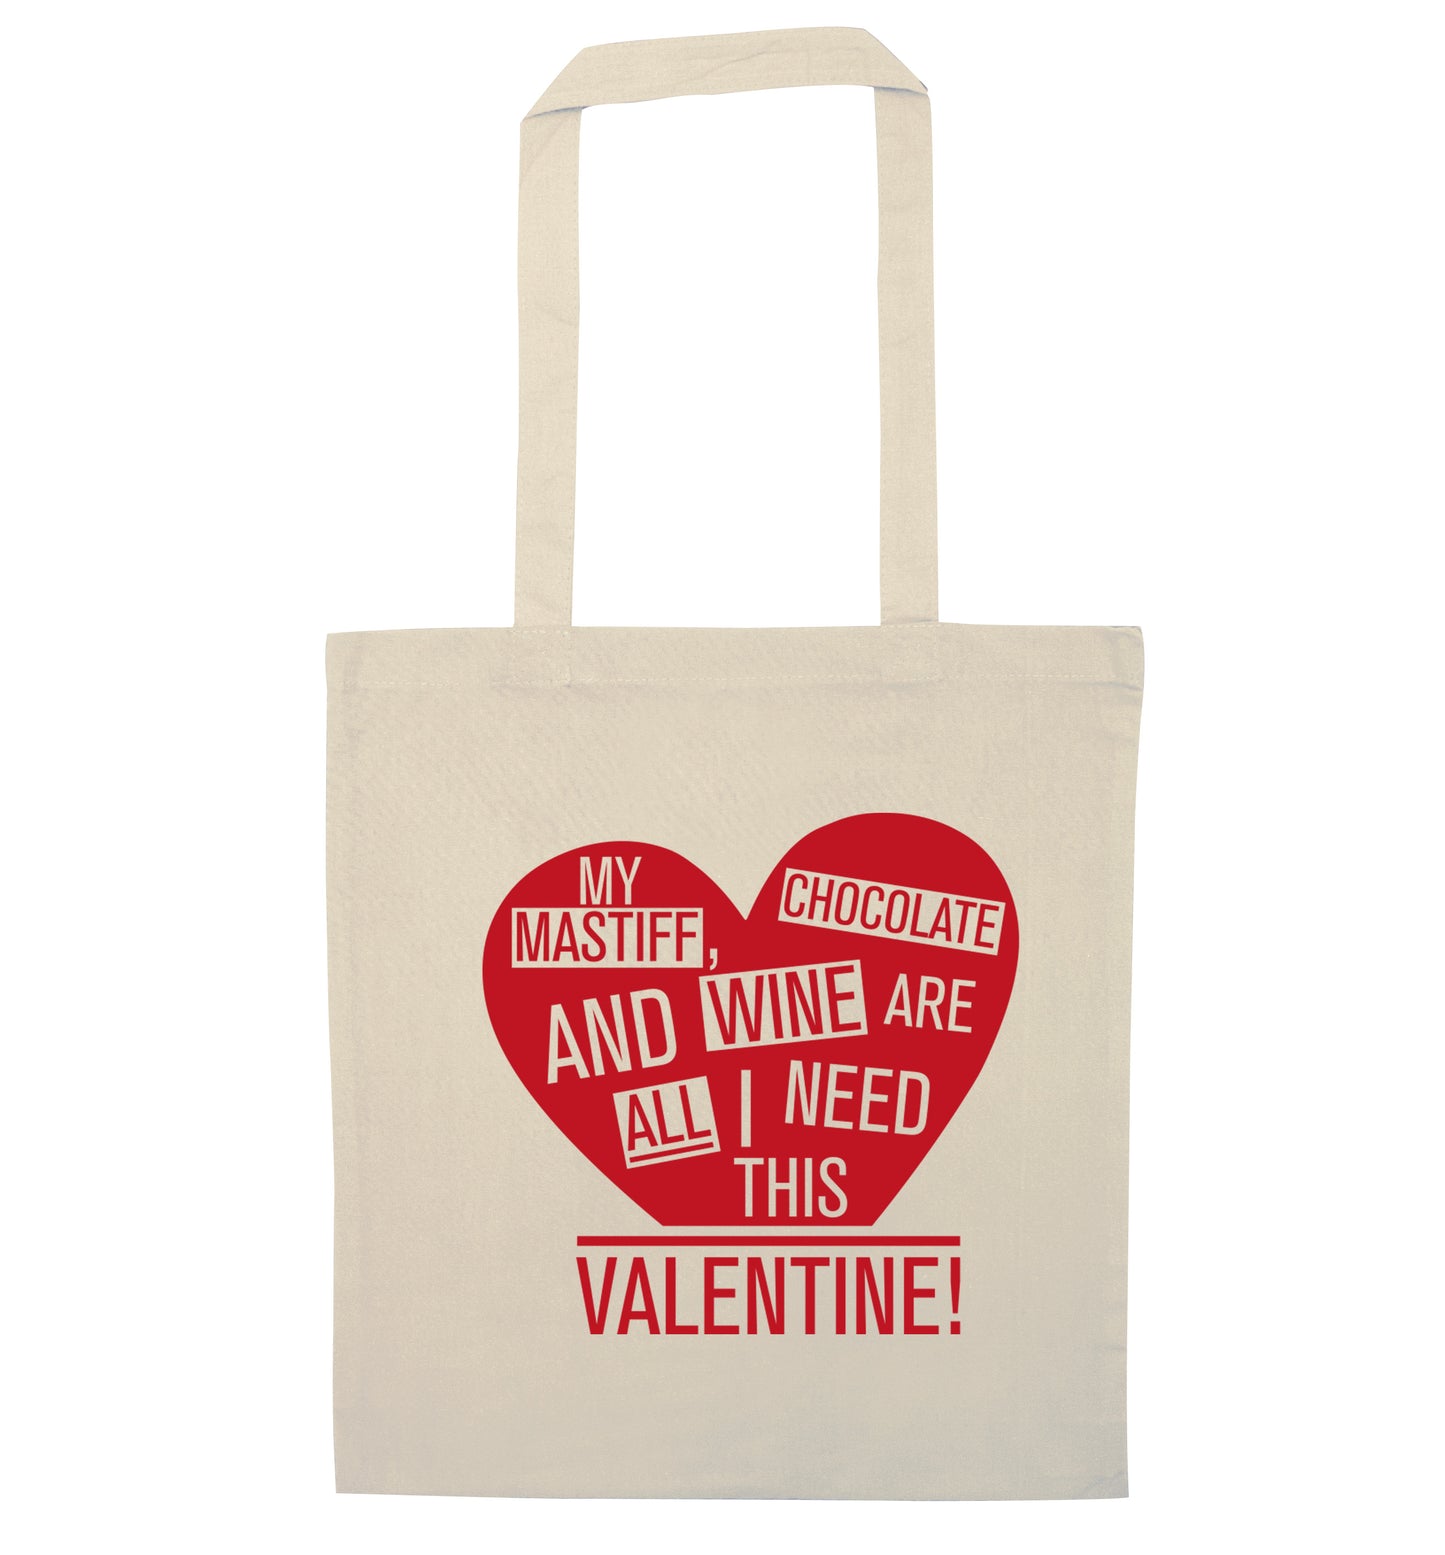 My mastiff, chocolate and wine are all I need this valentine! natural tote bag